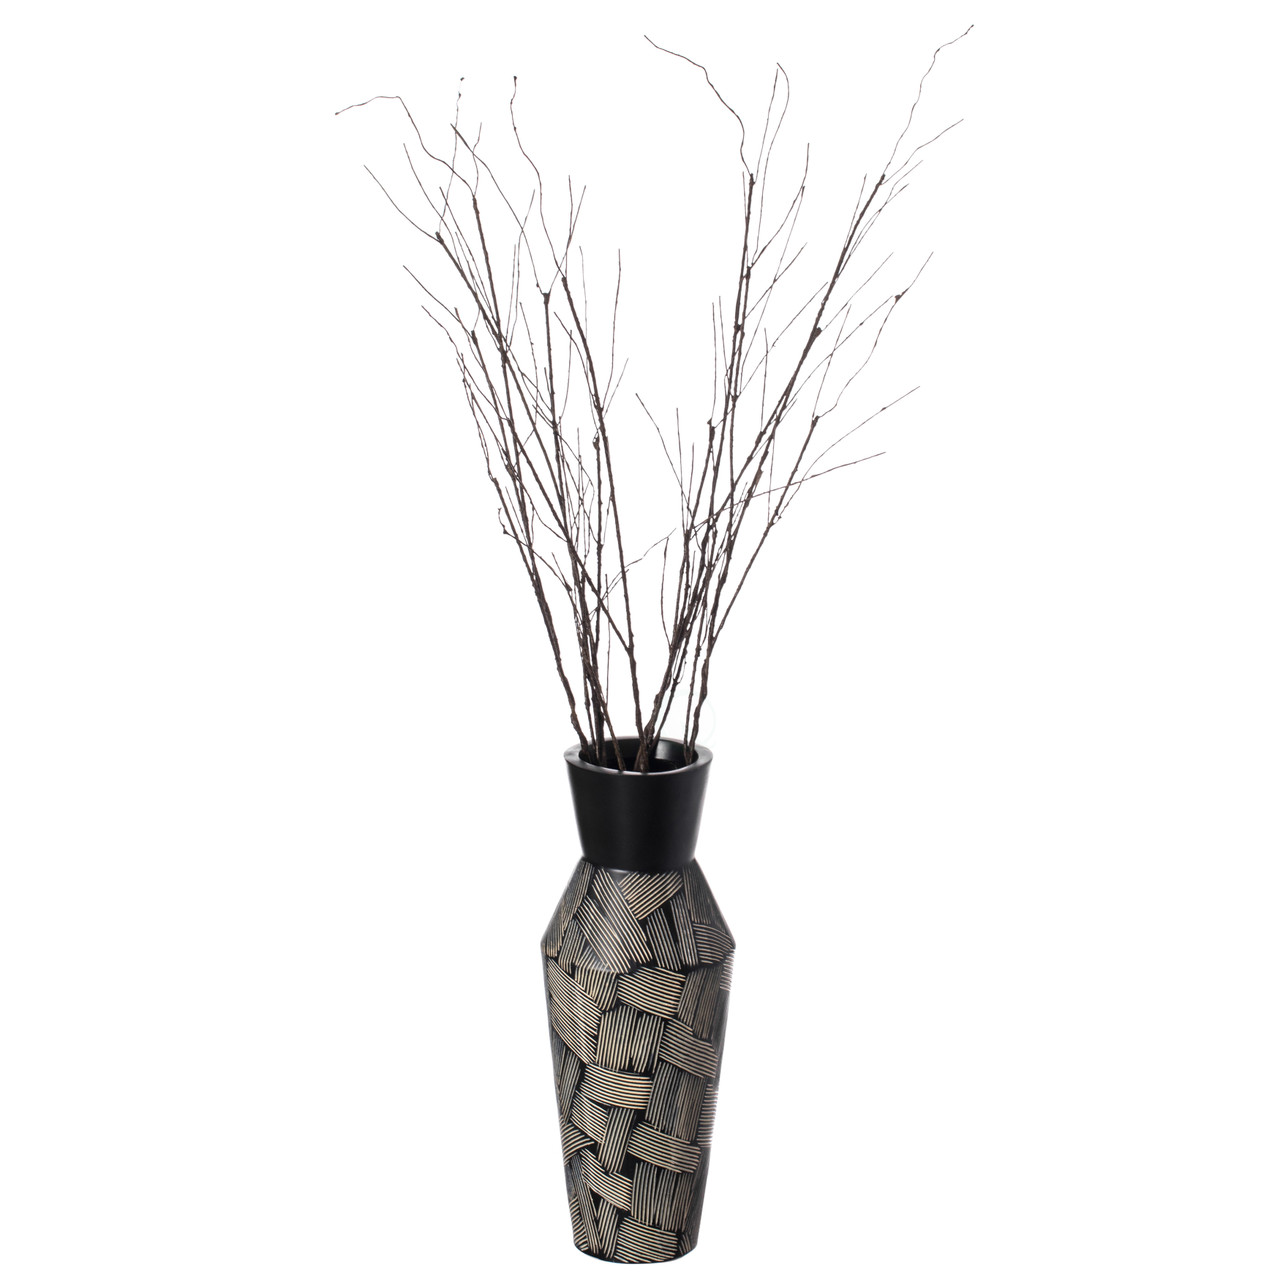 SEWACC 3pcs Artificial Tree Branch Decorative Branches for Vases Tall Table  Bouquet Centerpiece Black Branches Tree Craft Twigs Fake Branches